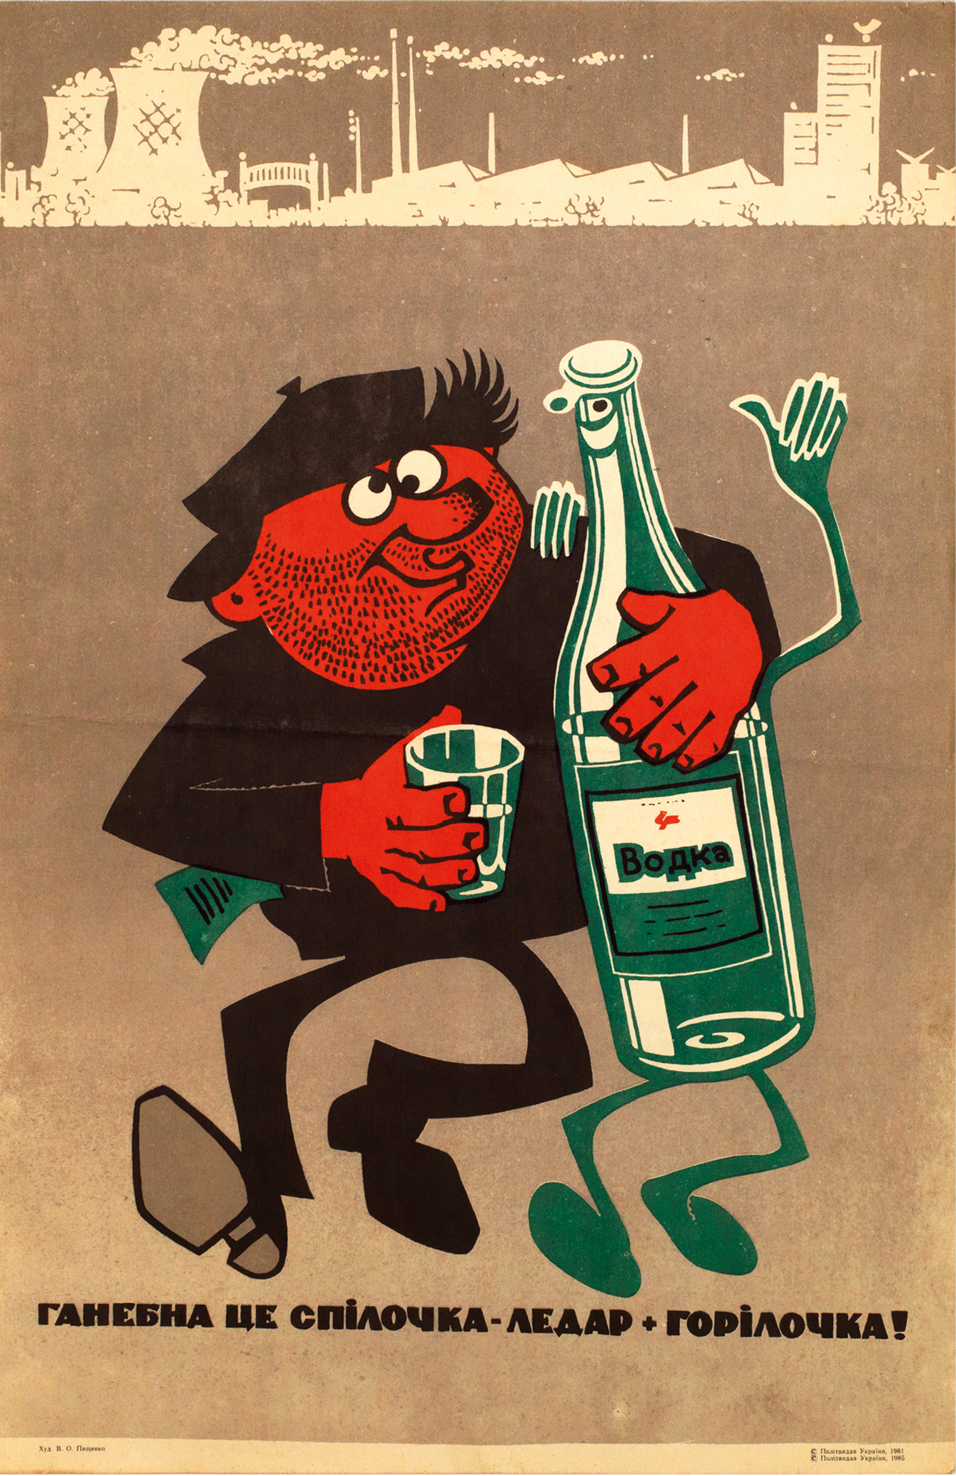 The Paris Review - Booze in the USSR: Soviet Anti-Alcohol Propaganda Posters